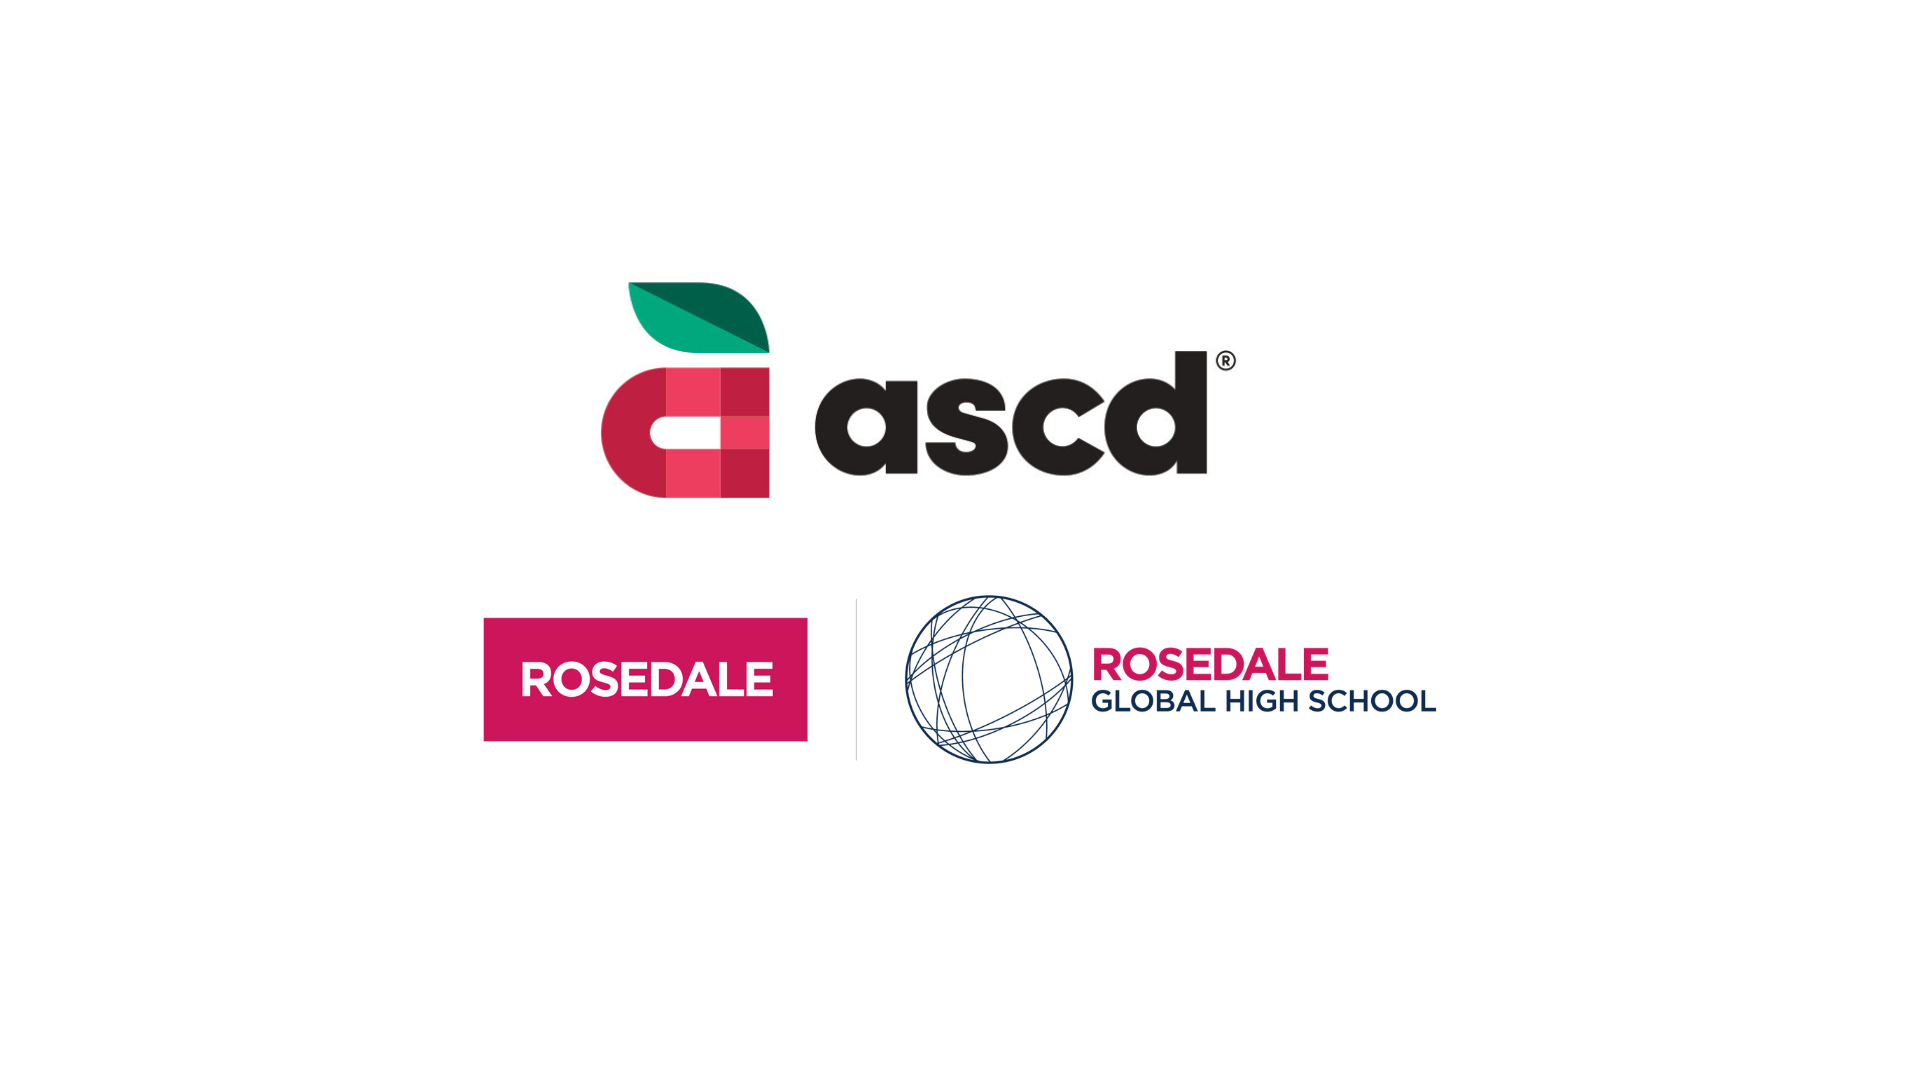 Rosedale is an Institutional Member of ASCD—the Association for Supervision and Curriculum Development